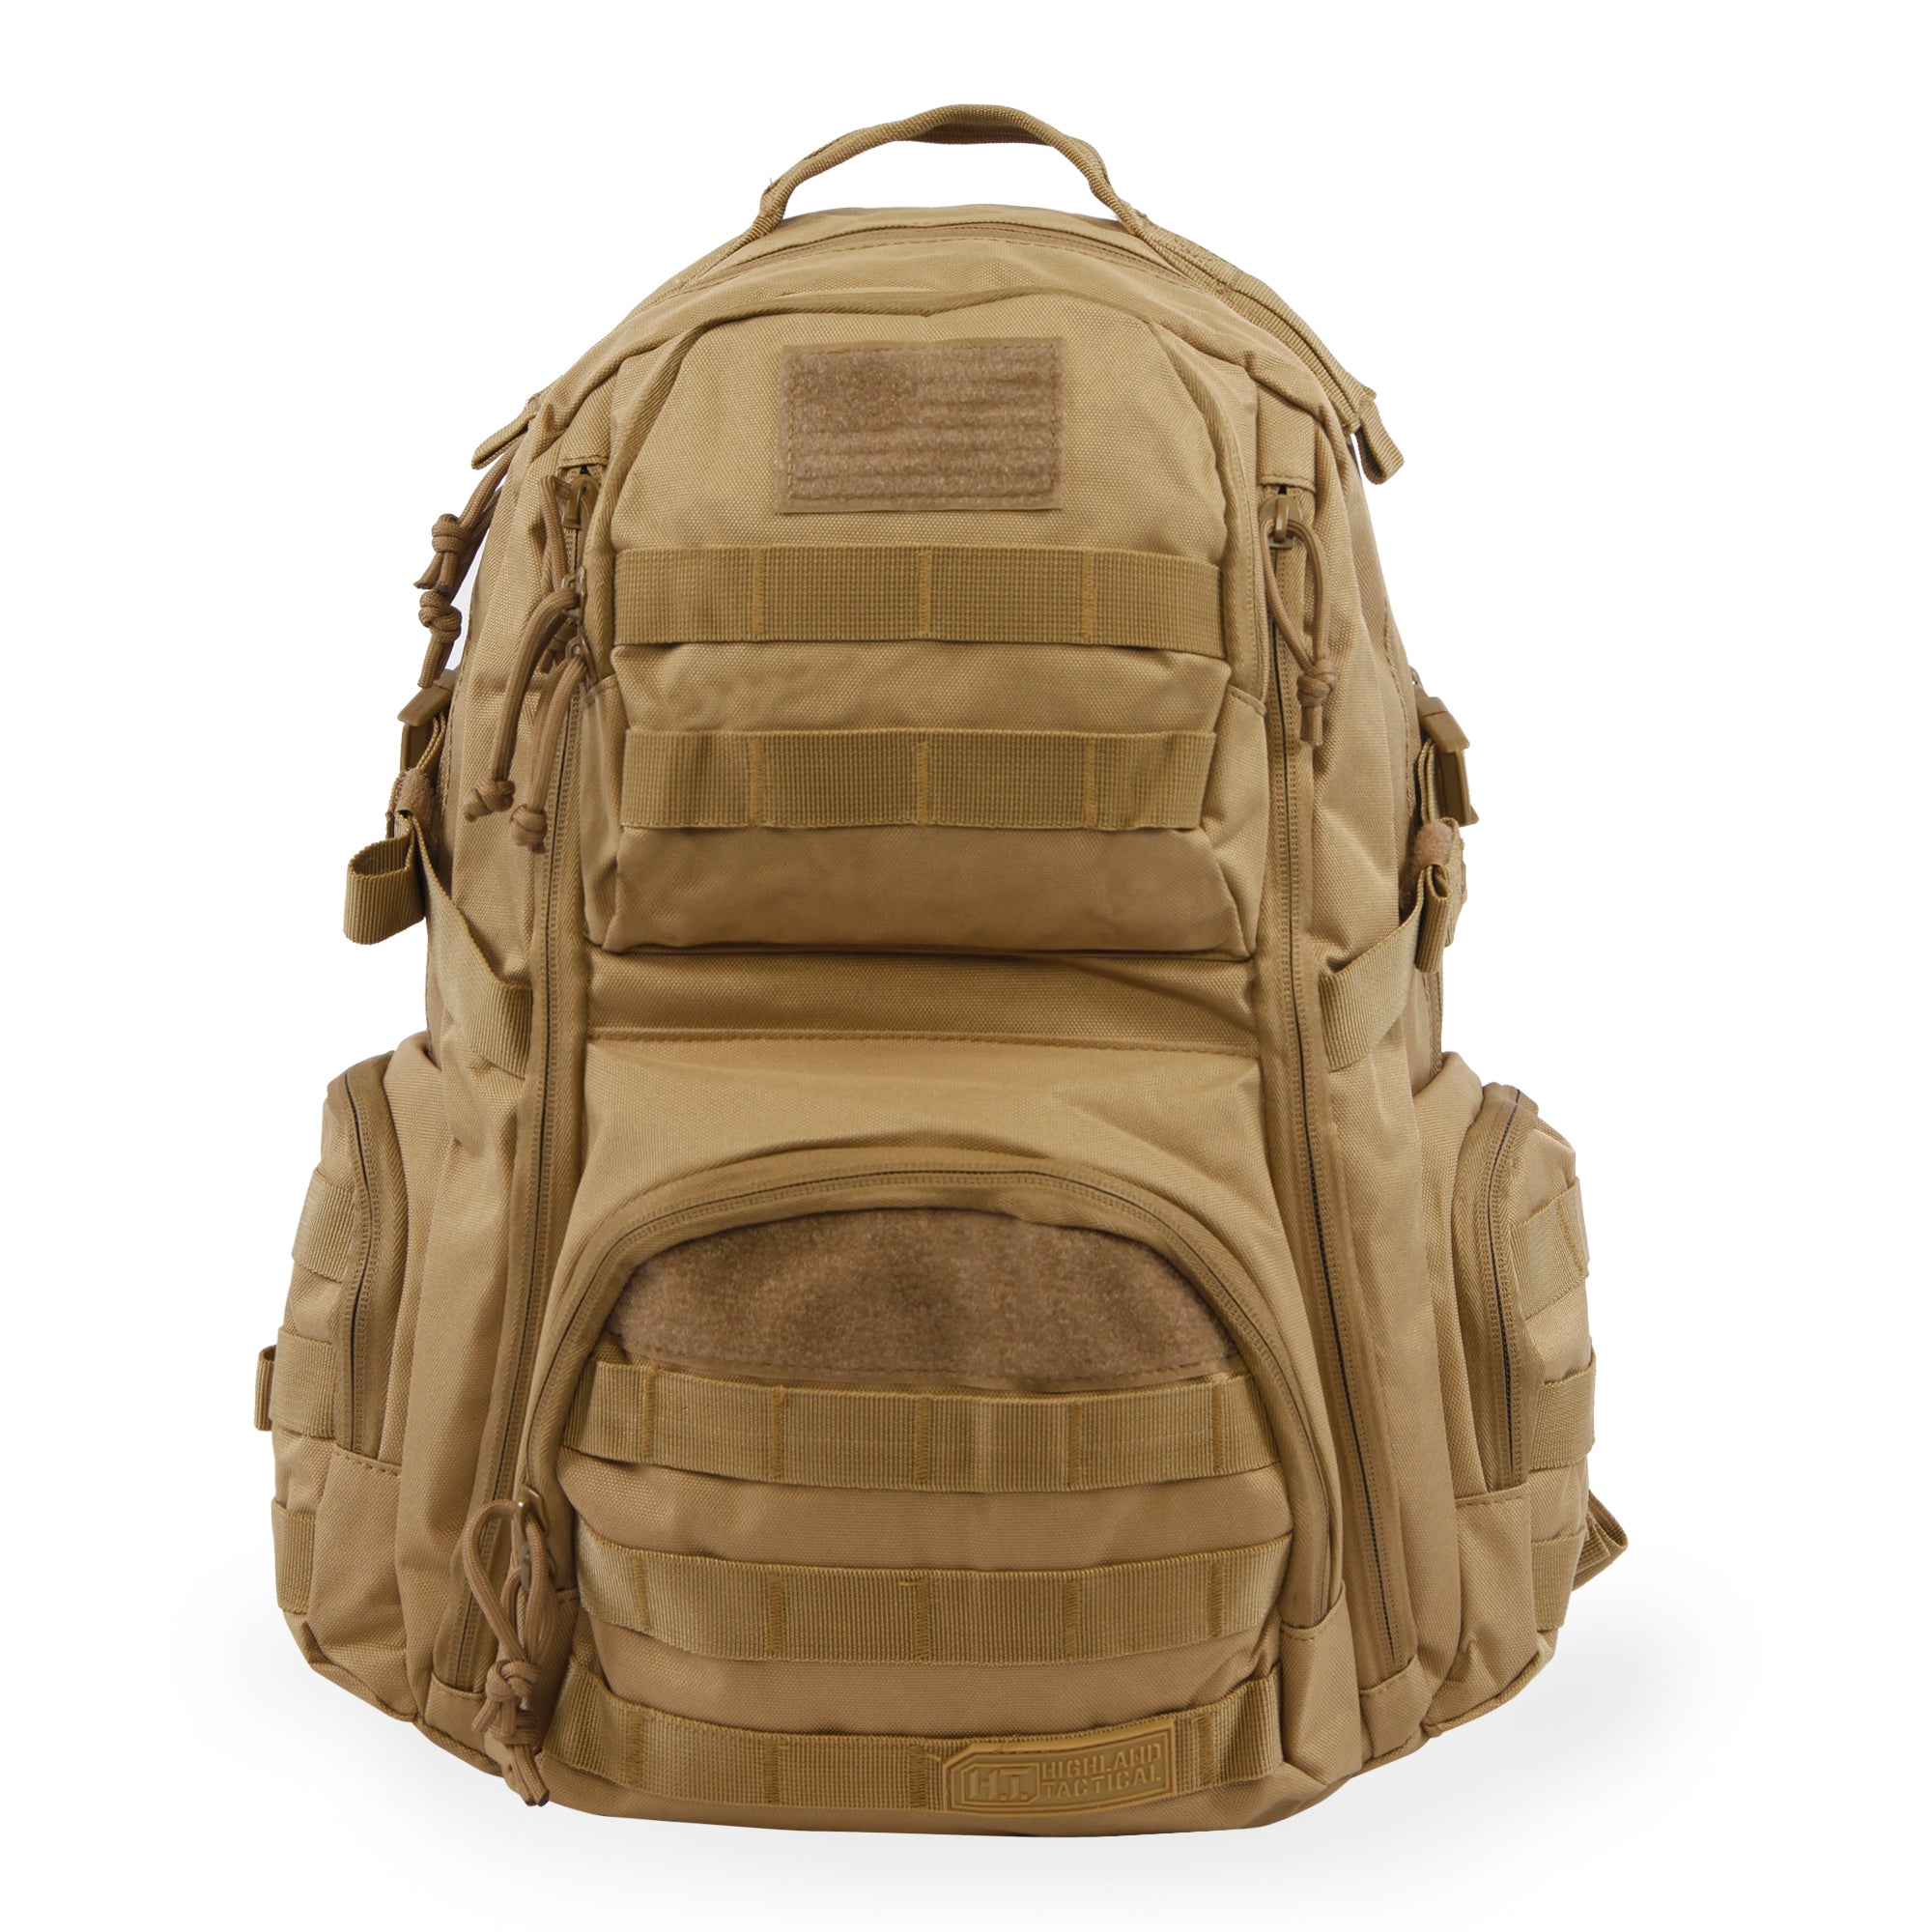 Crusher Backpack | Tactical Day Pack | Multiple Pockets | Best Day Pack | Hiking | Range | #color_desert-coyote